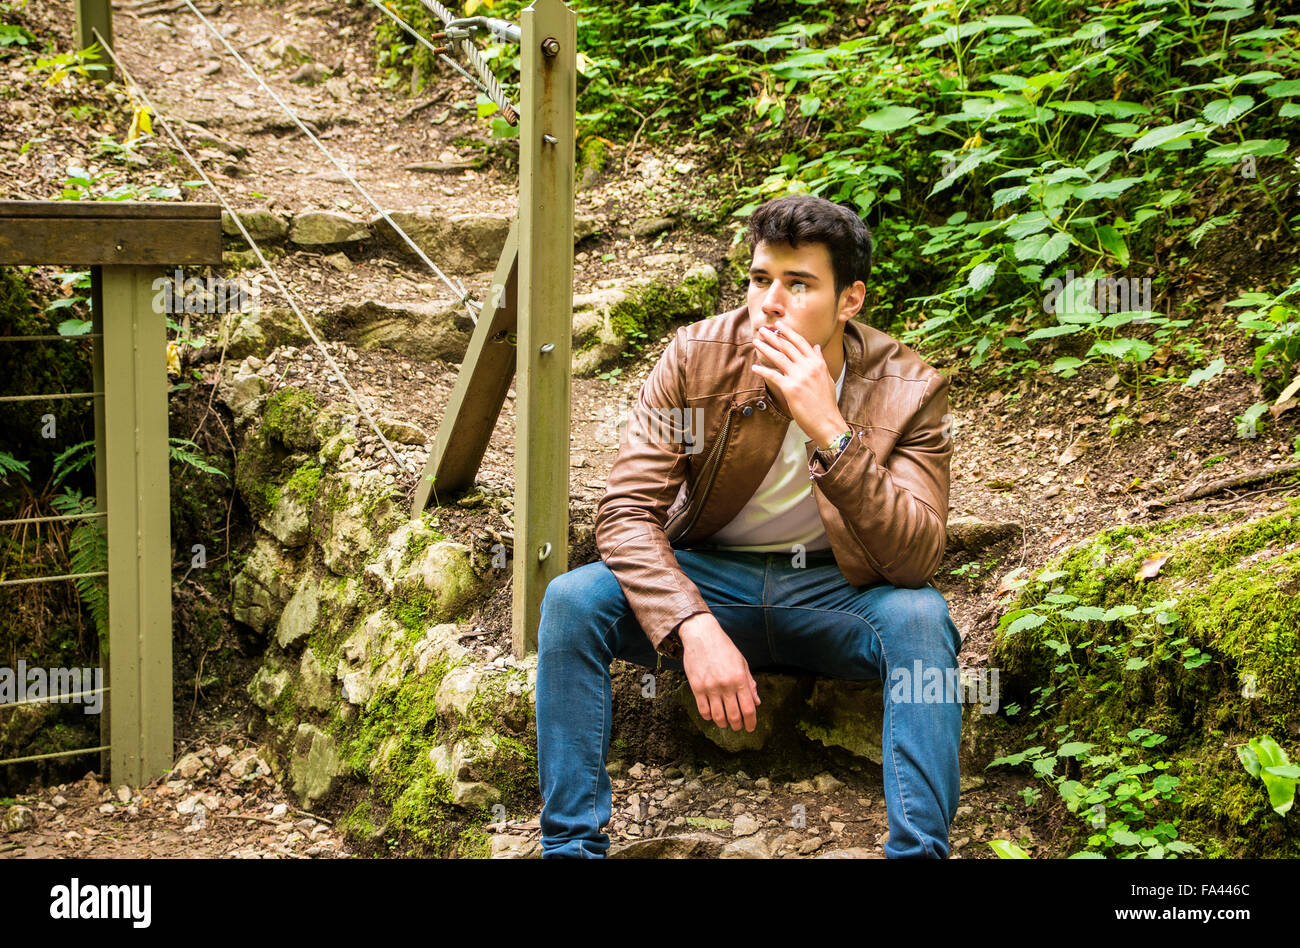 Handsome young man sitting and smoking in park, looking away Stock Photo